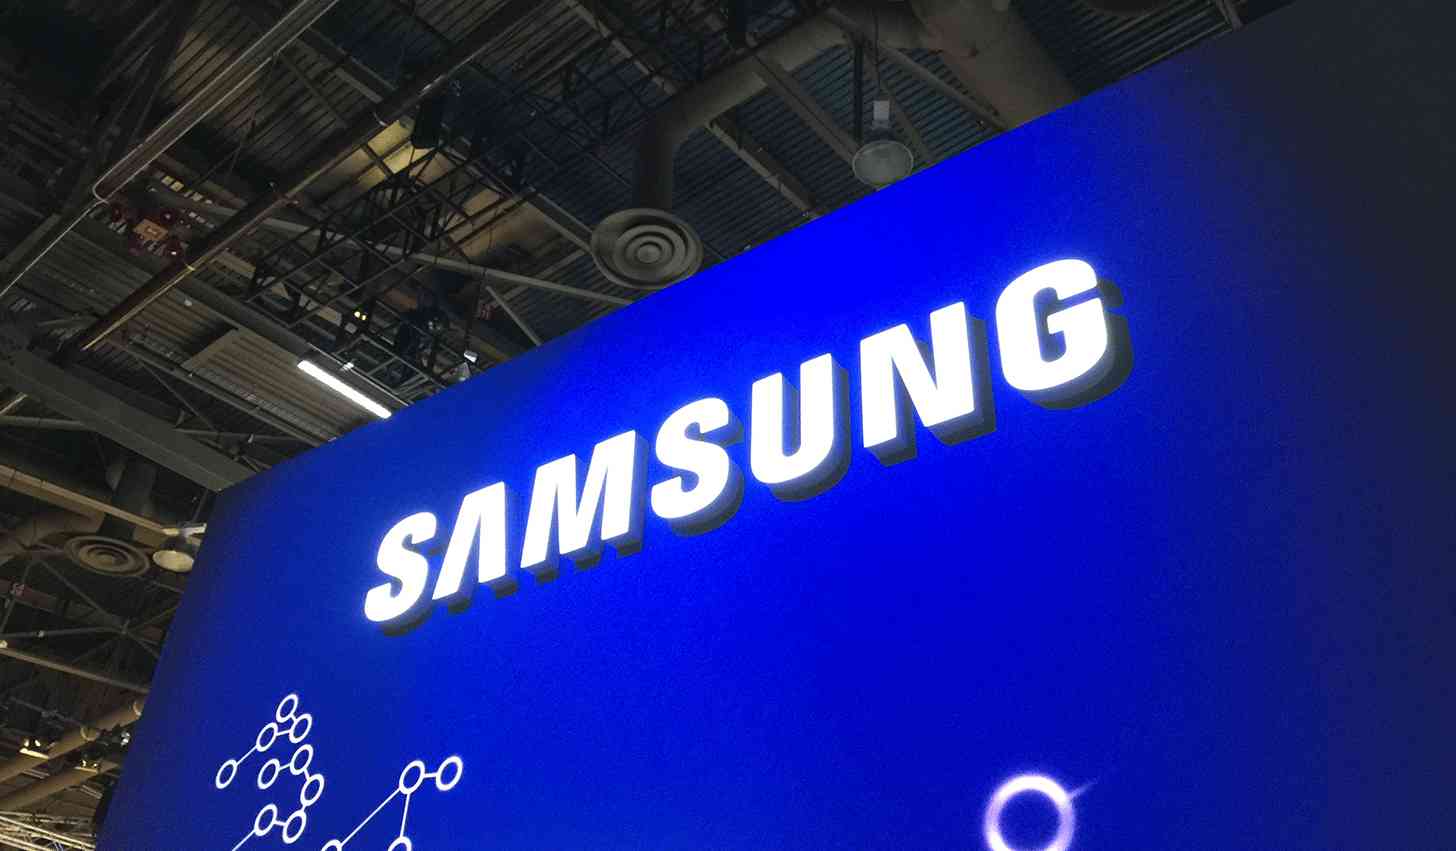 Samsung CES 2015 booth